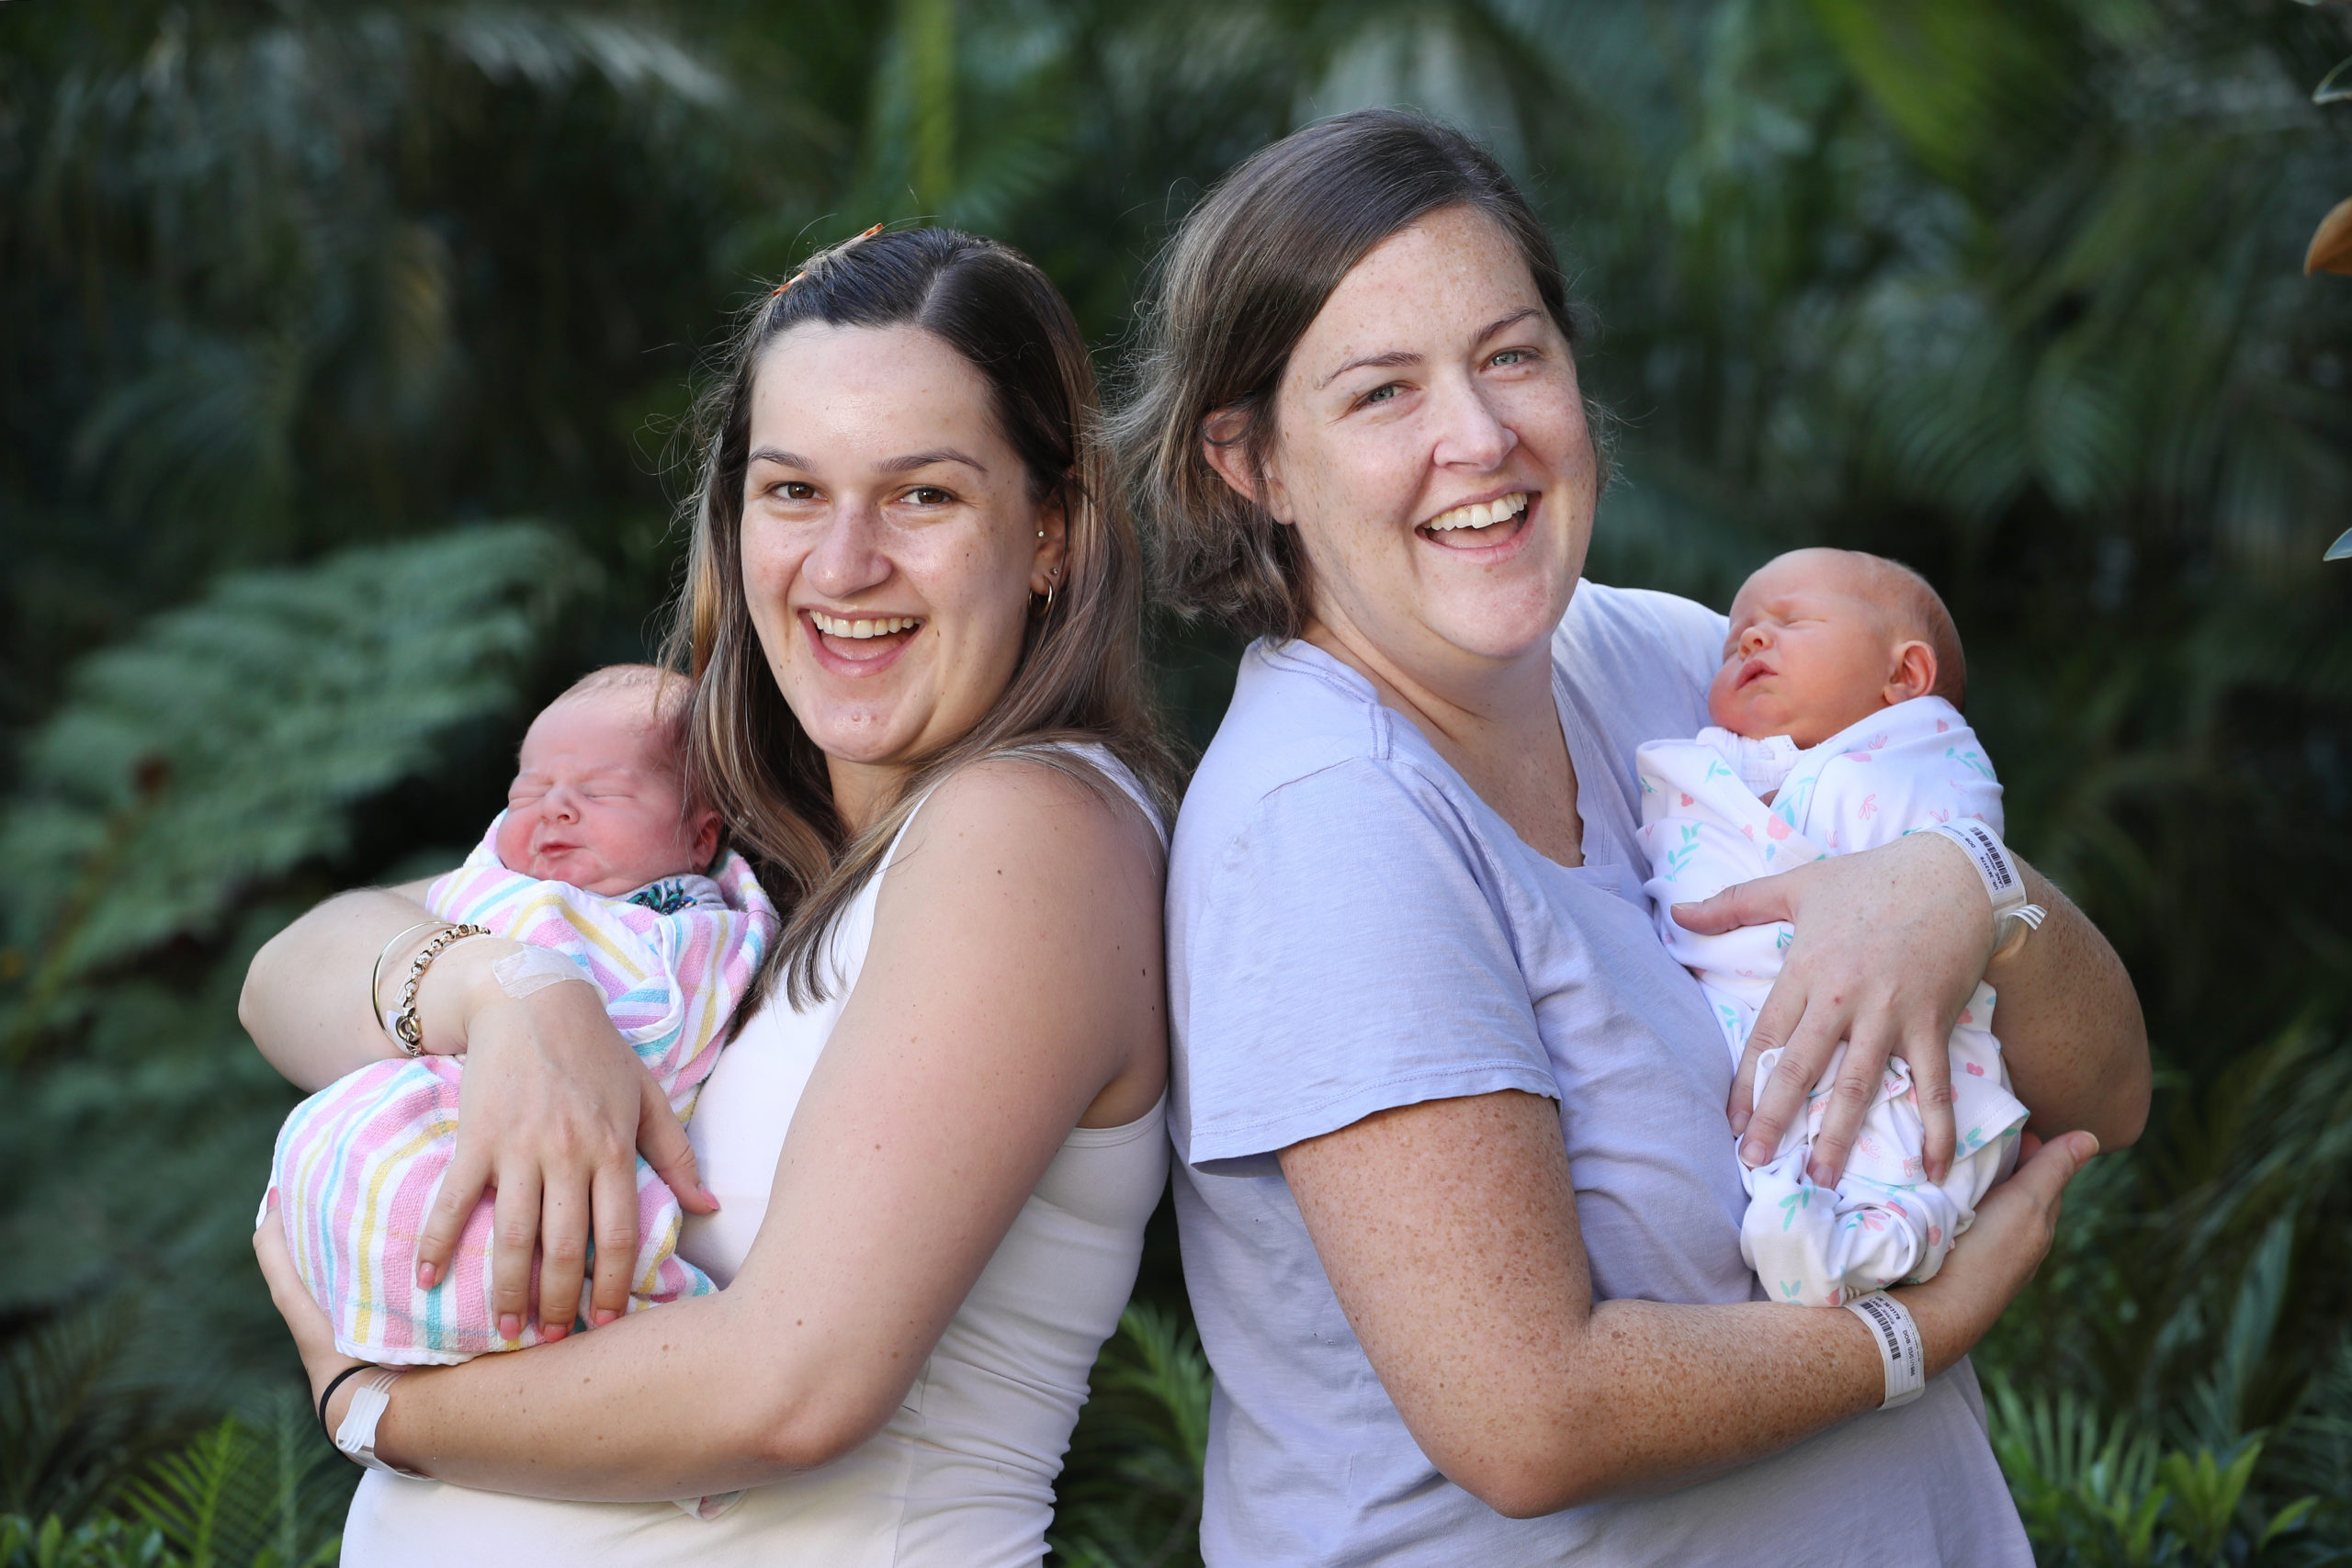 REAL LIFE: Queensland sisters brave torrential rain to give birth days apart